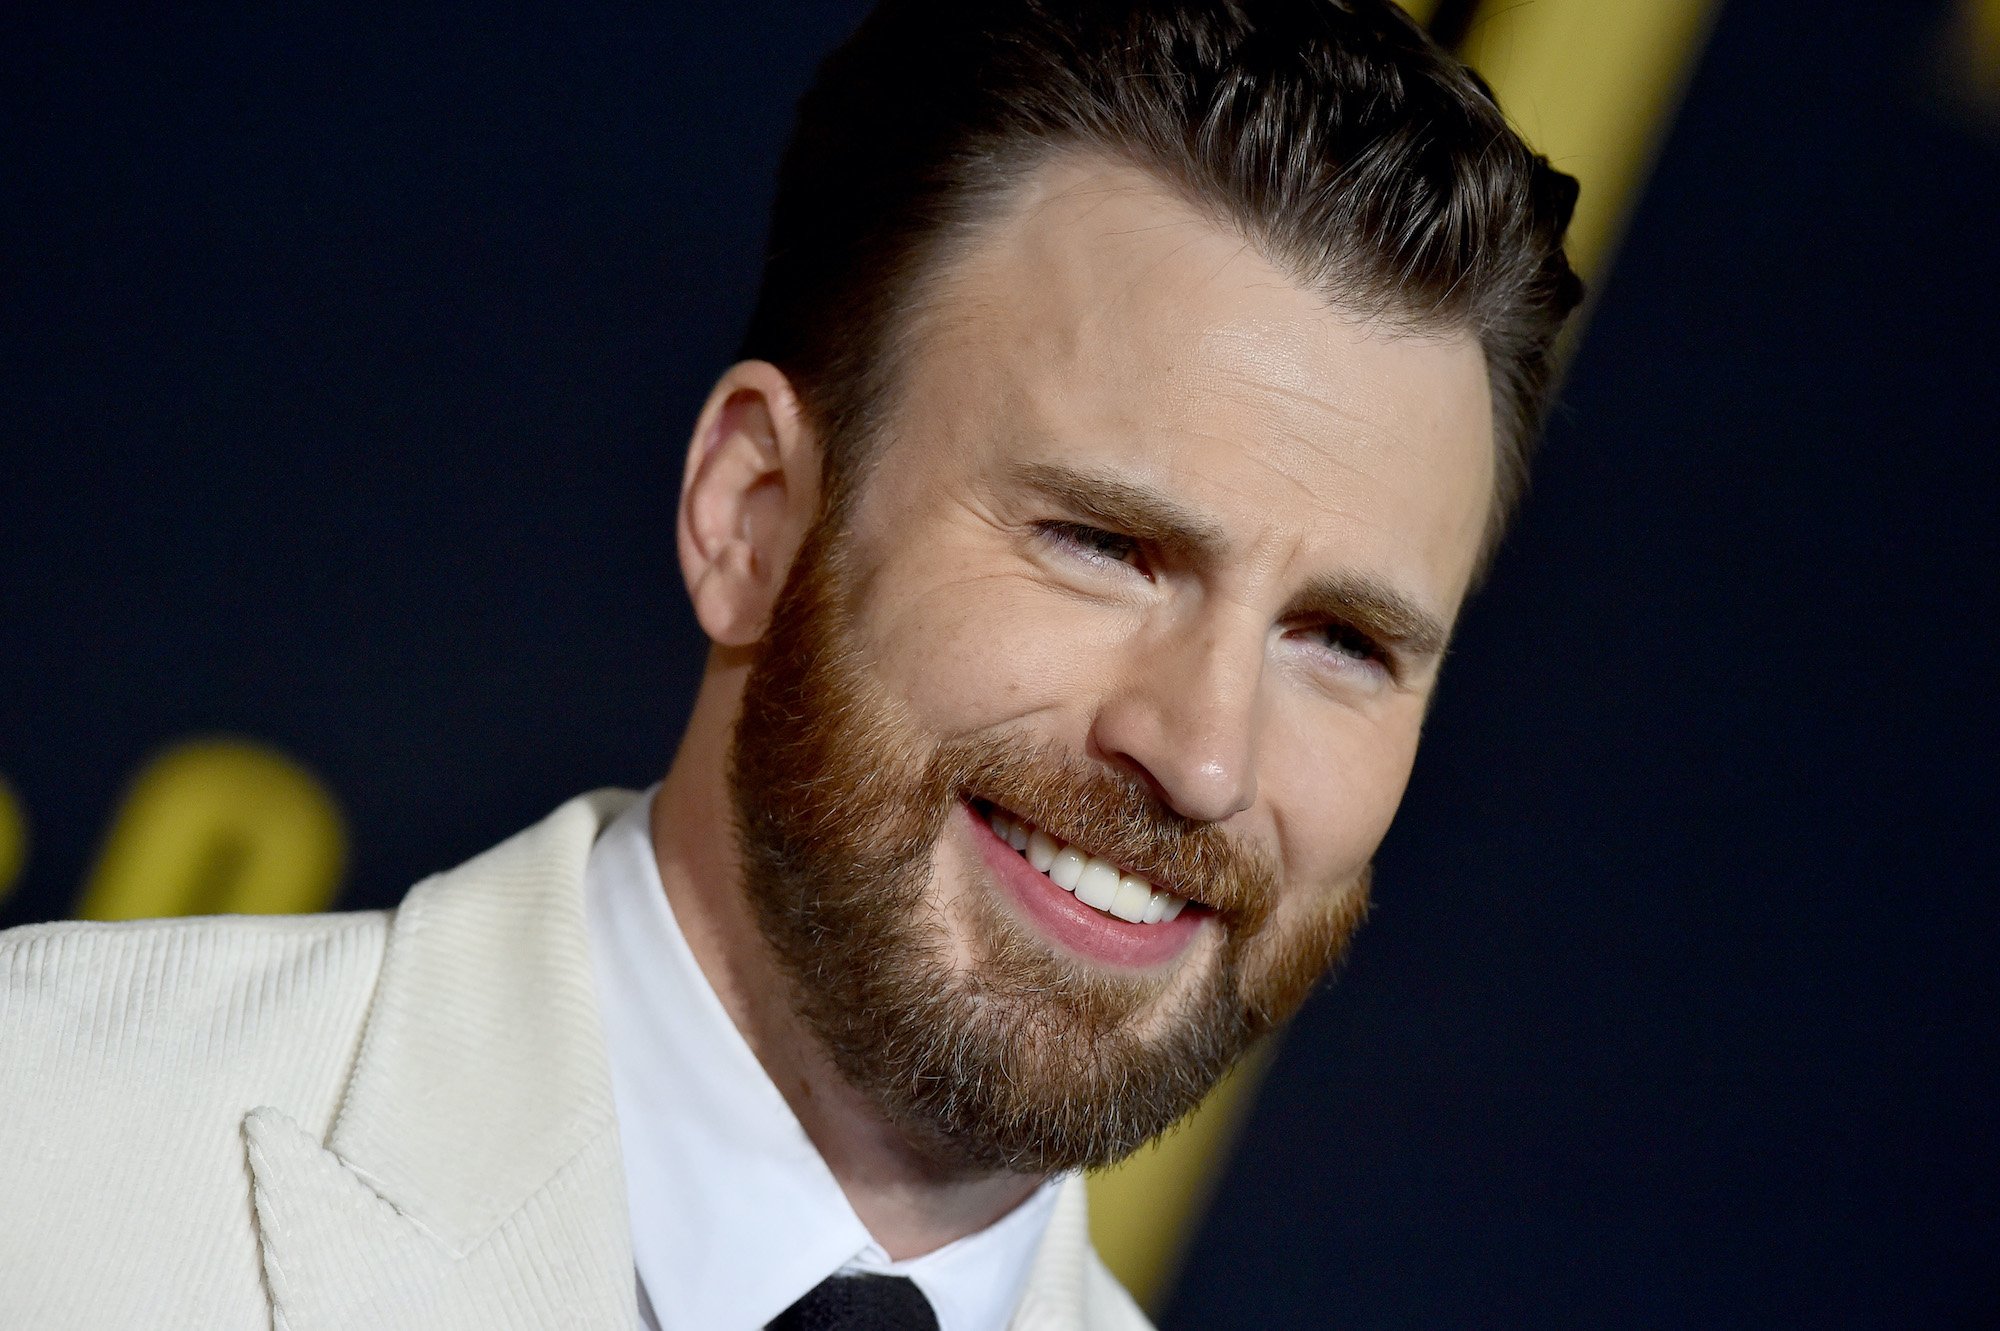 Chris Evans’ MCU Exit Might Have Been the Best Thing for the Captain America Story, Fans Say